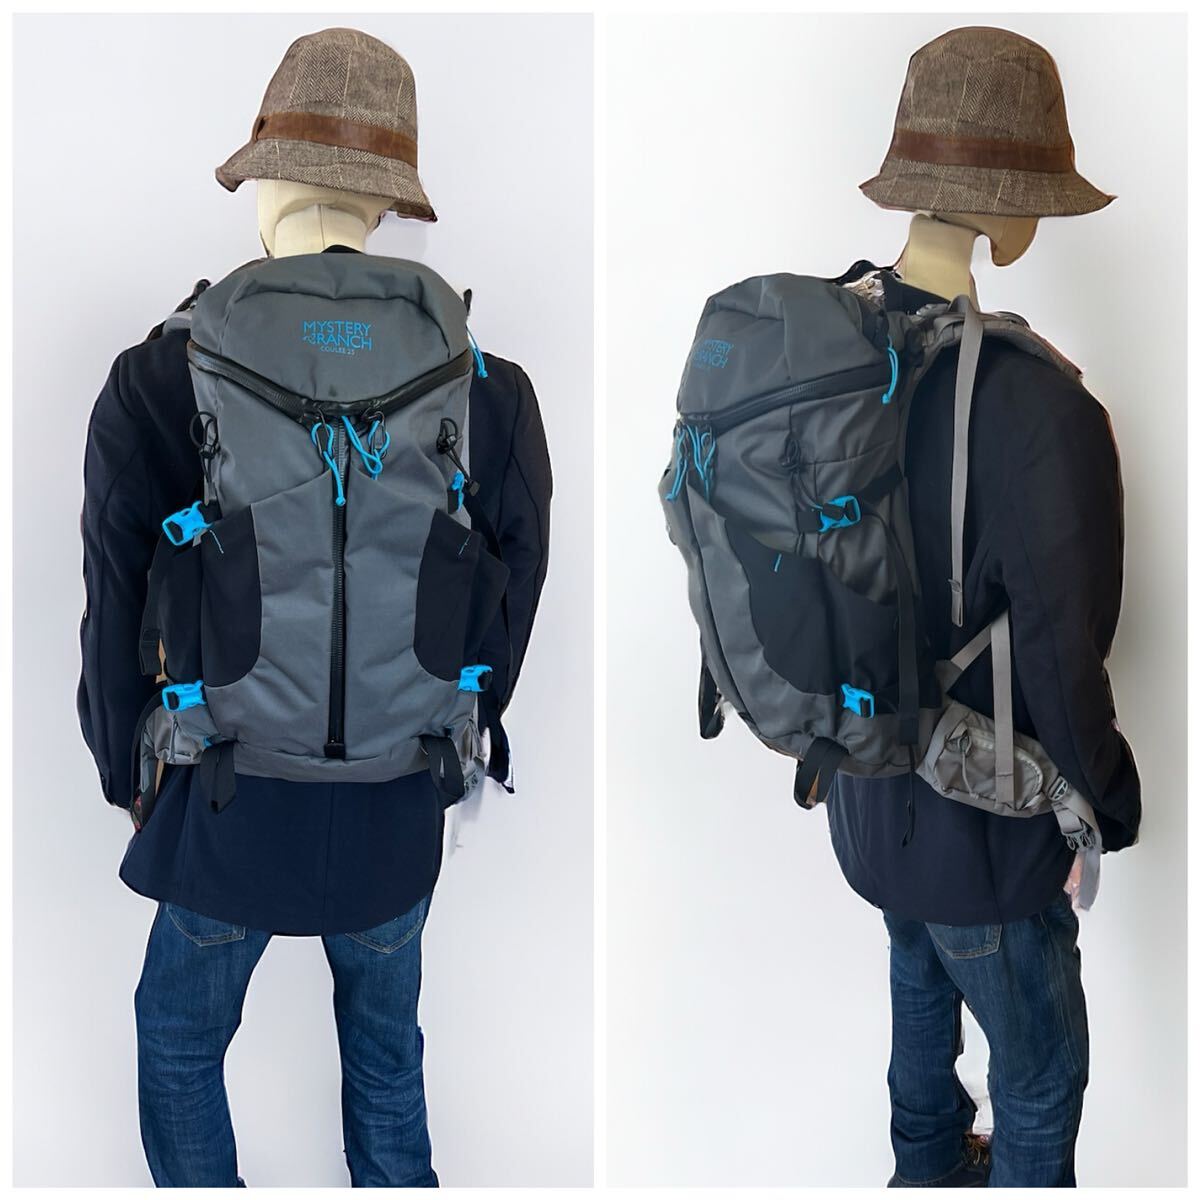 [ great popularity ]MYSTERY RANCH COULEE25 GRAY Mystery Ranch Koo Lee 25 rucksack shadow moon lady's men's combined use bag pack 